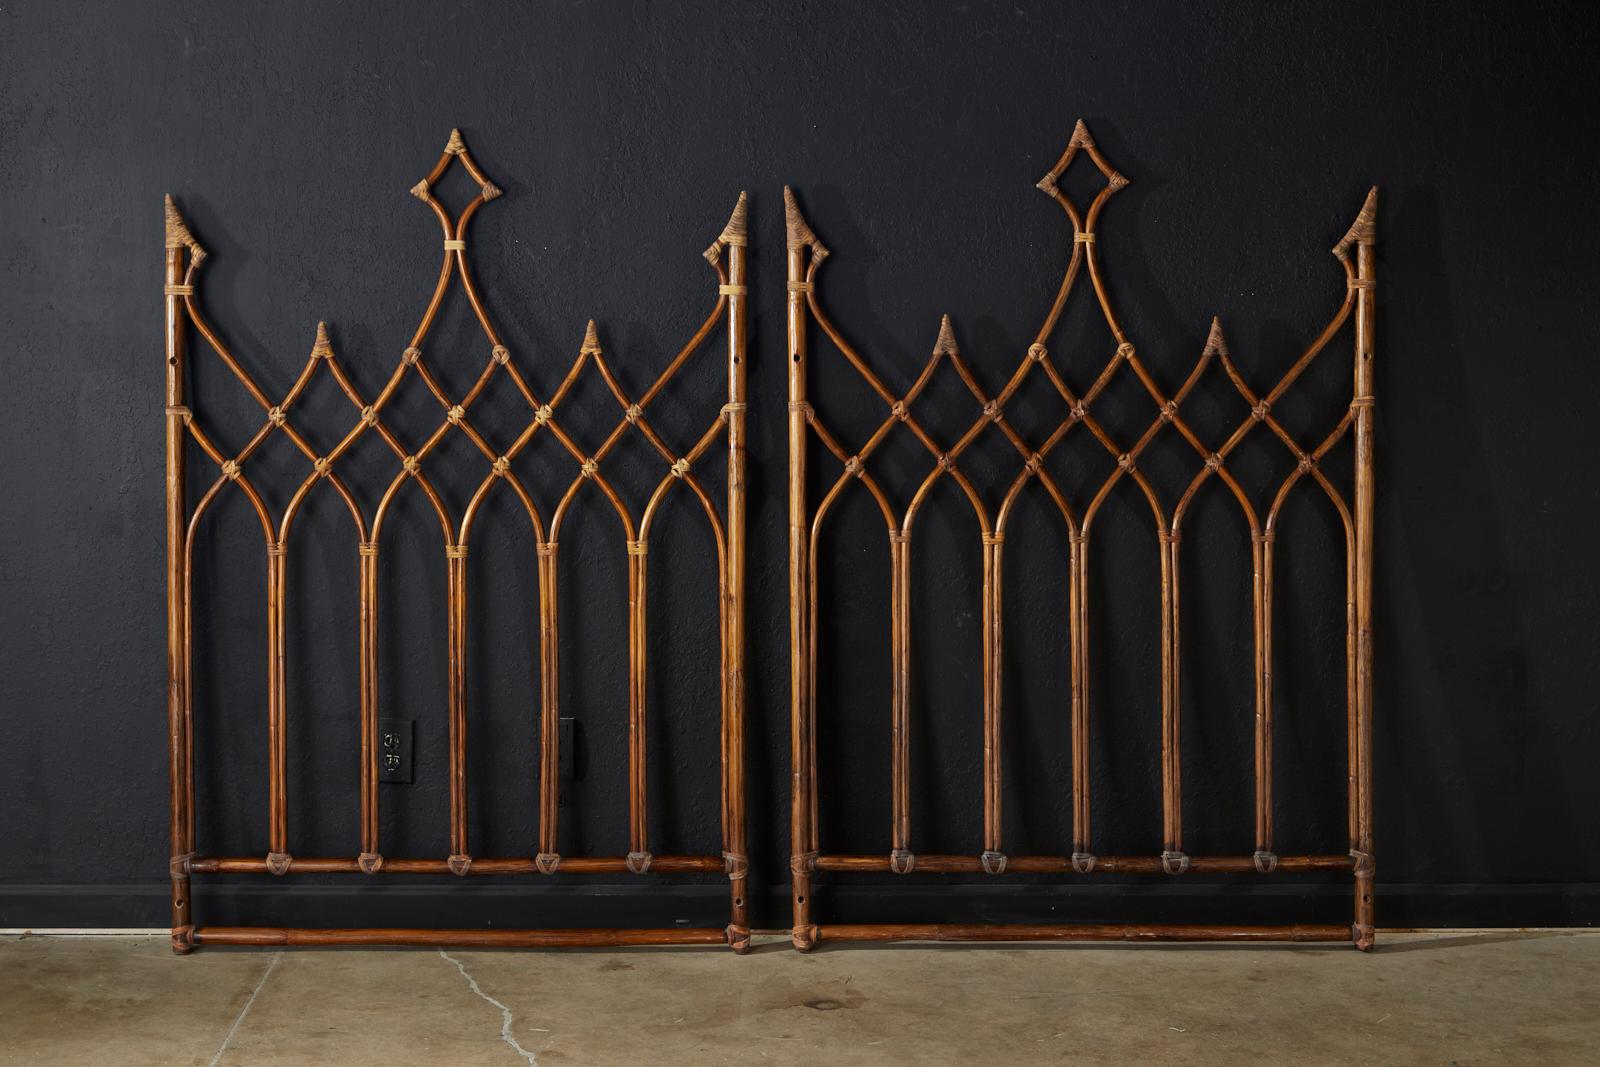 Distinctive pair of bamboo rattan twin headboards made by McGuire. Constructed form gracefully curved rattan poles having cathedral shaped arches in a gothic revival style. Lashed together with leather rawhide laces on the exposed joints. They